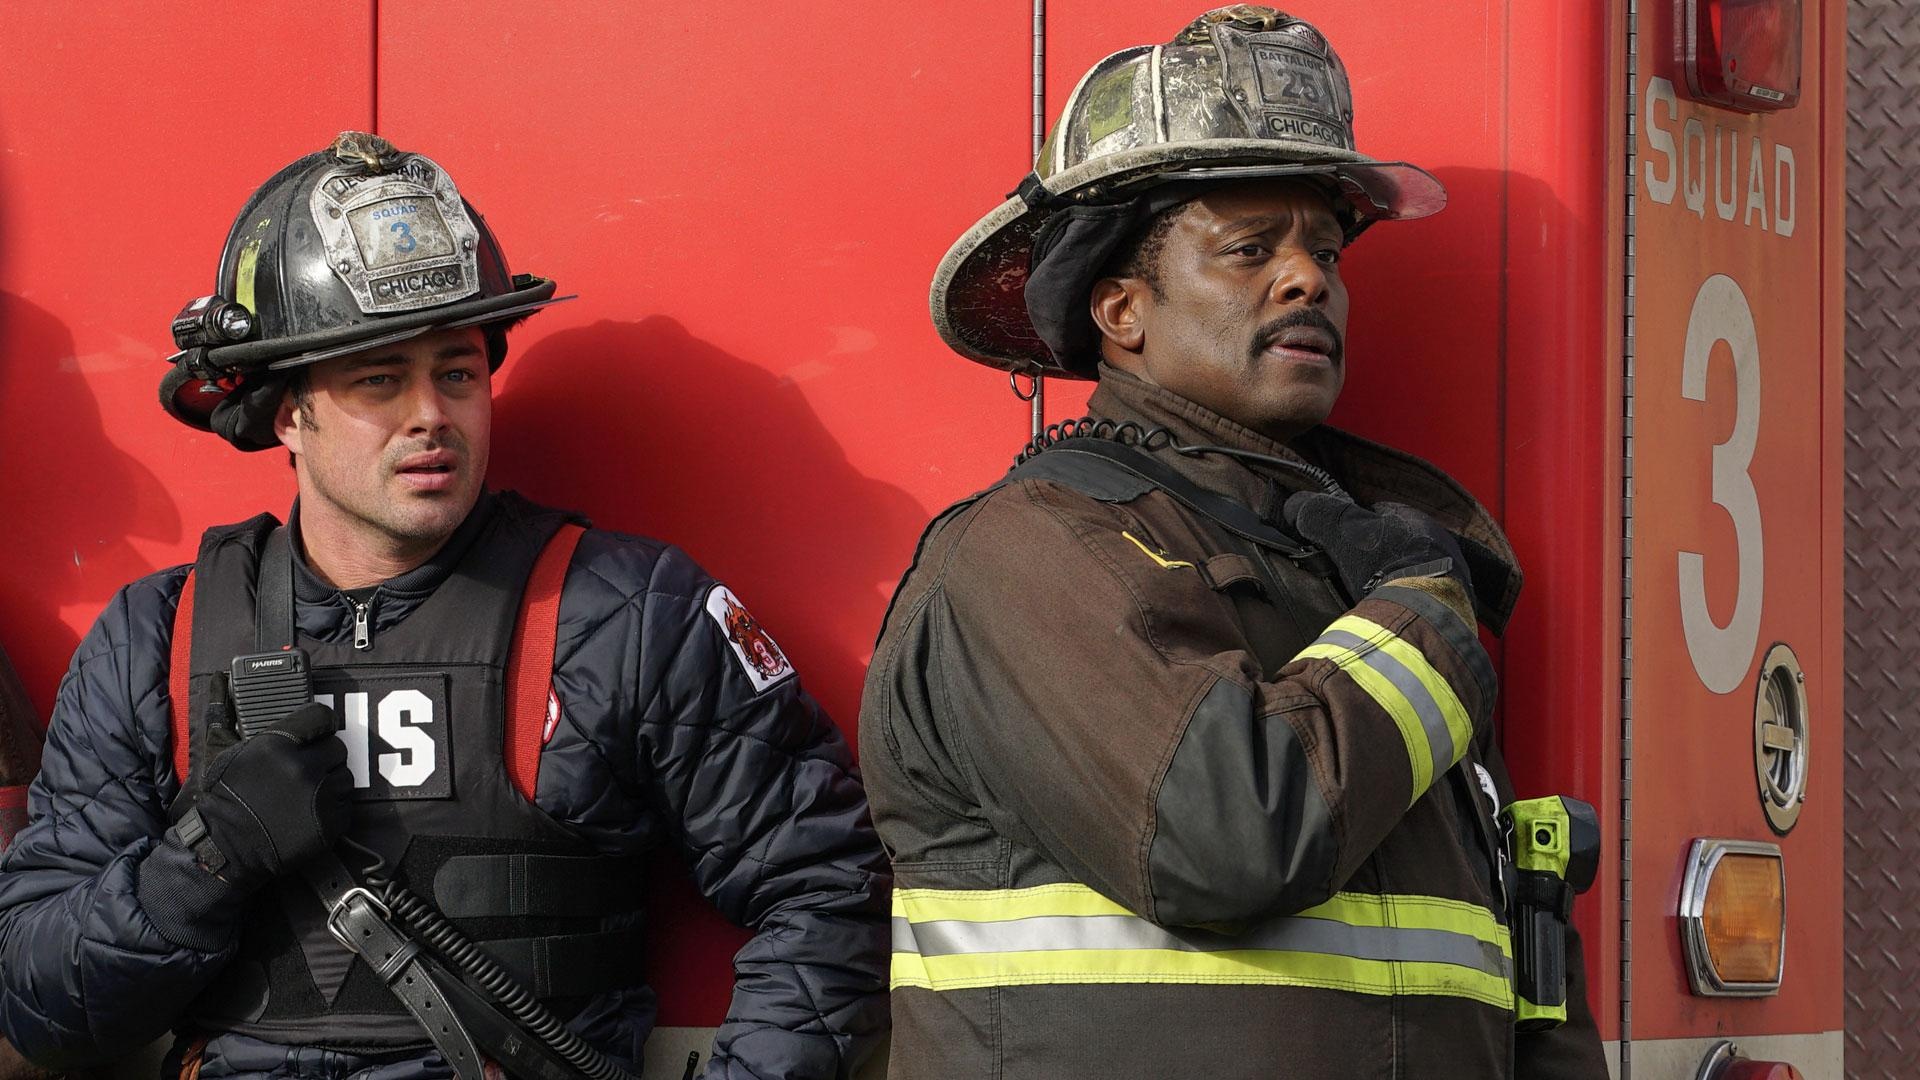 Fireman: Chicago Fire, Fictional Firehouse 51, Firefighters, rescue personnel. 1920x1080 Full HD Wallpaper.